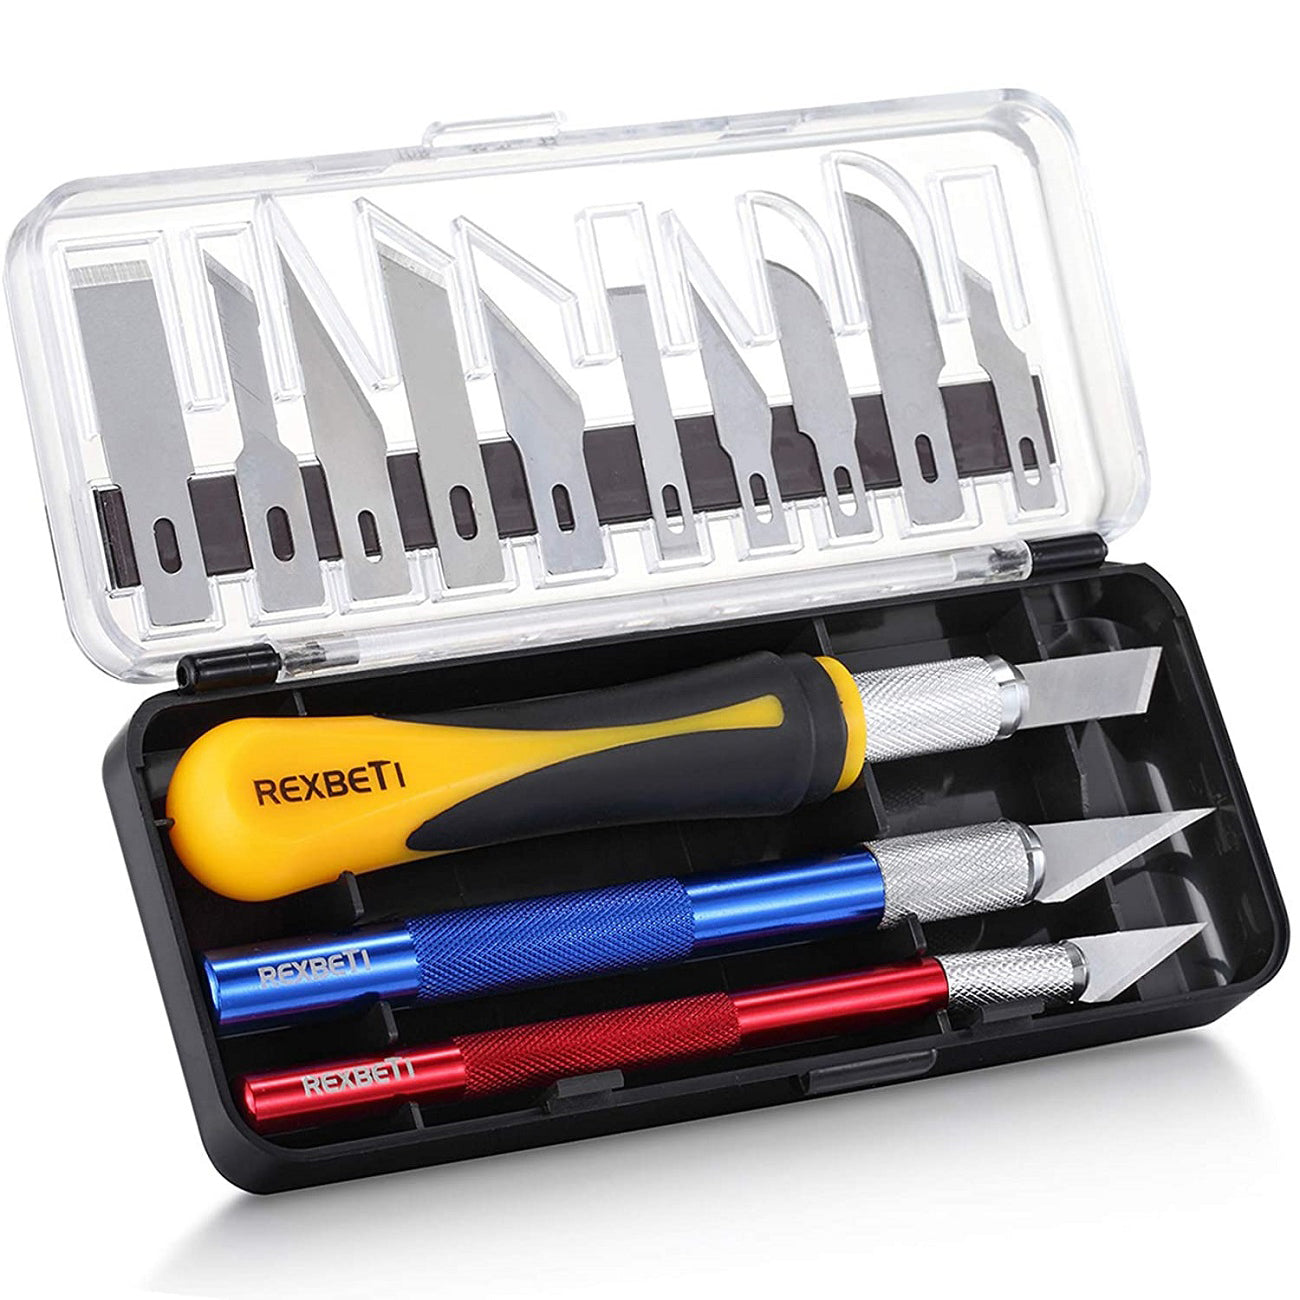 16 Piece Hobby Knife Set with 3 Handles and Carrying Case - PL1600-YH